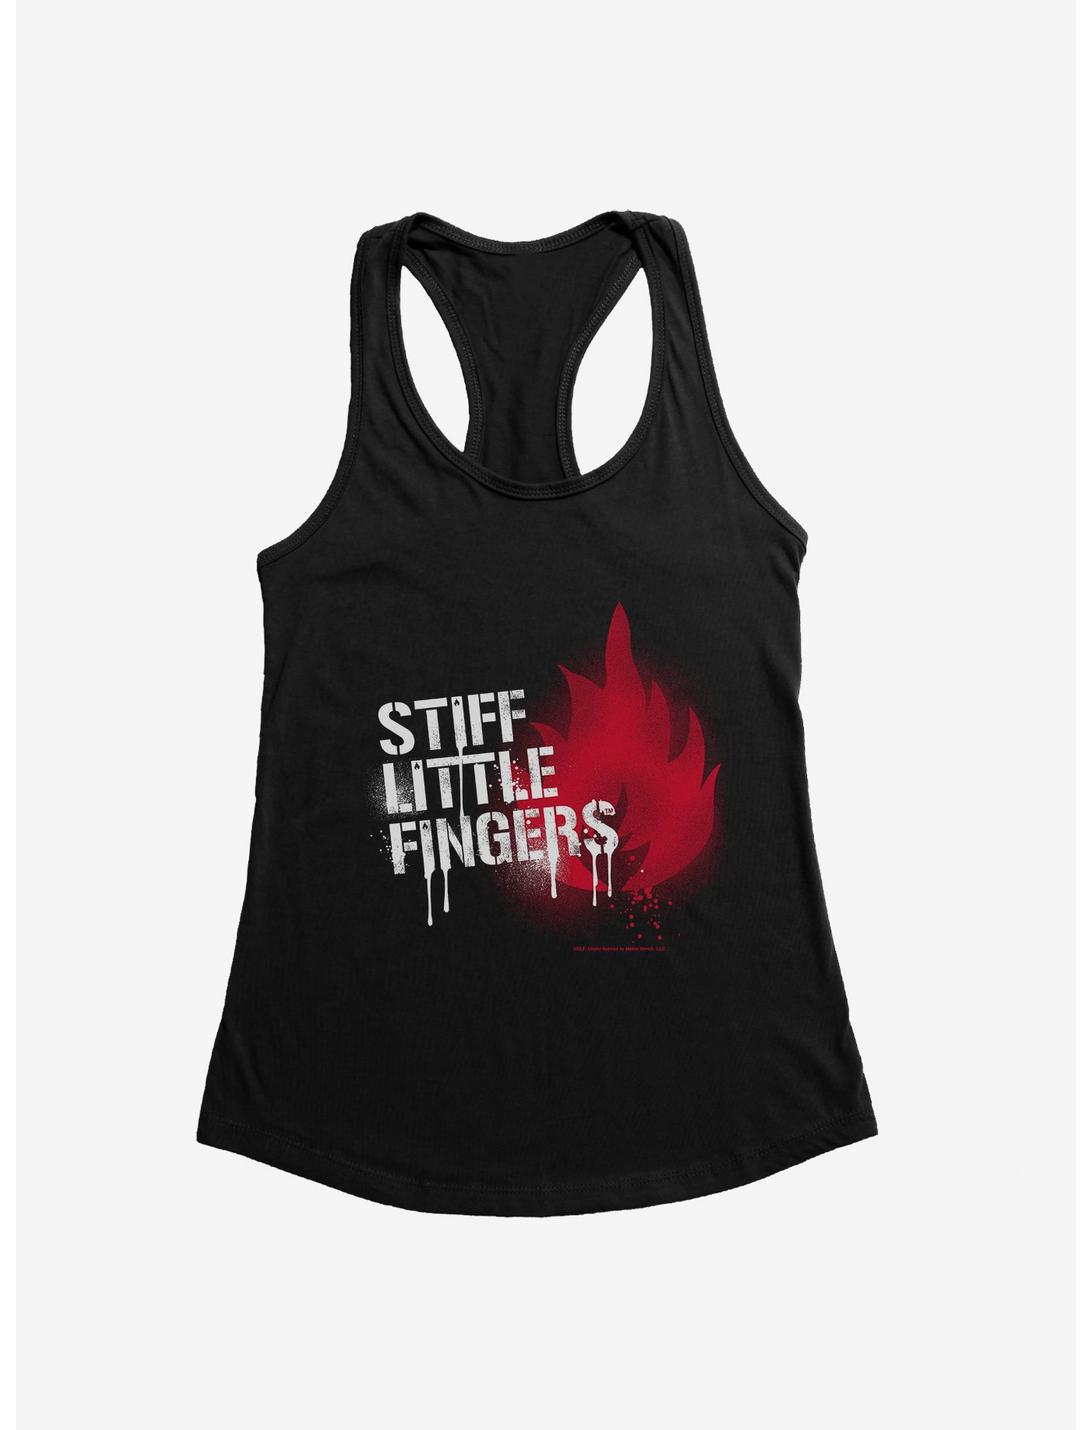 Stiff Little Fingers Inflammable Material Girls Tank, BLACK, hi-res